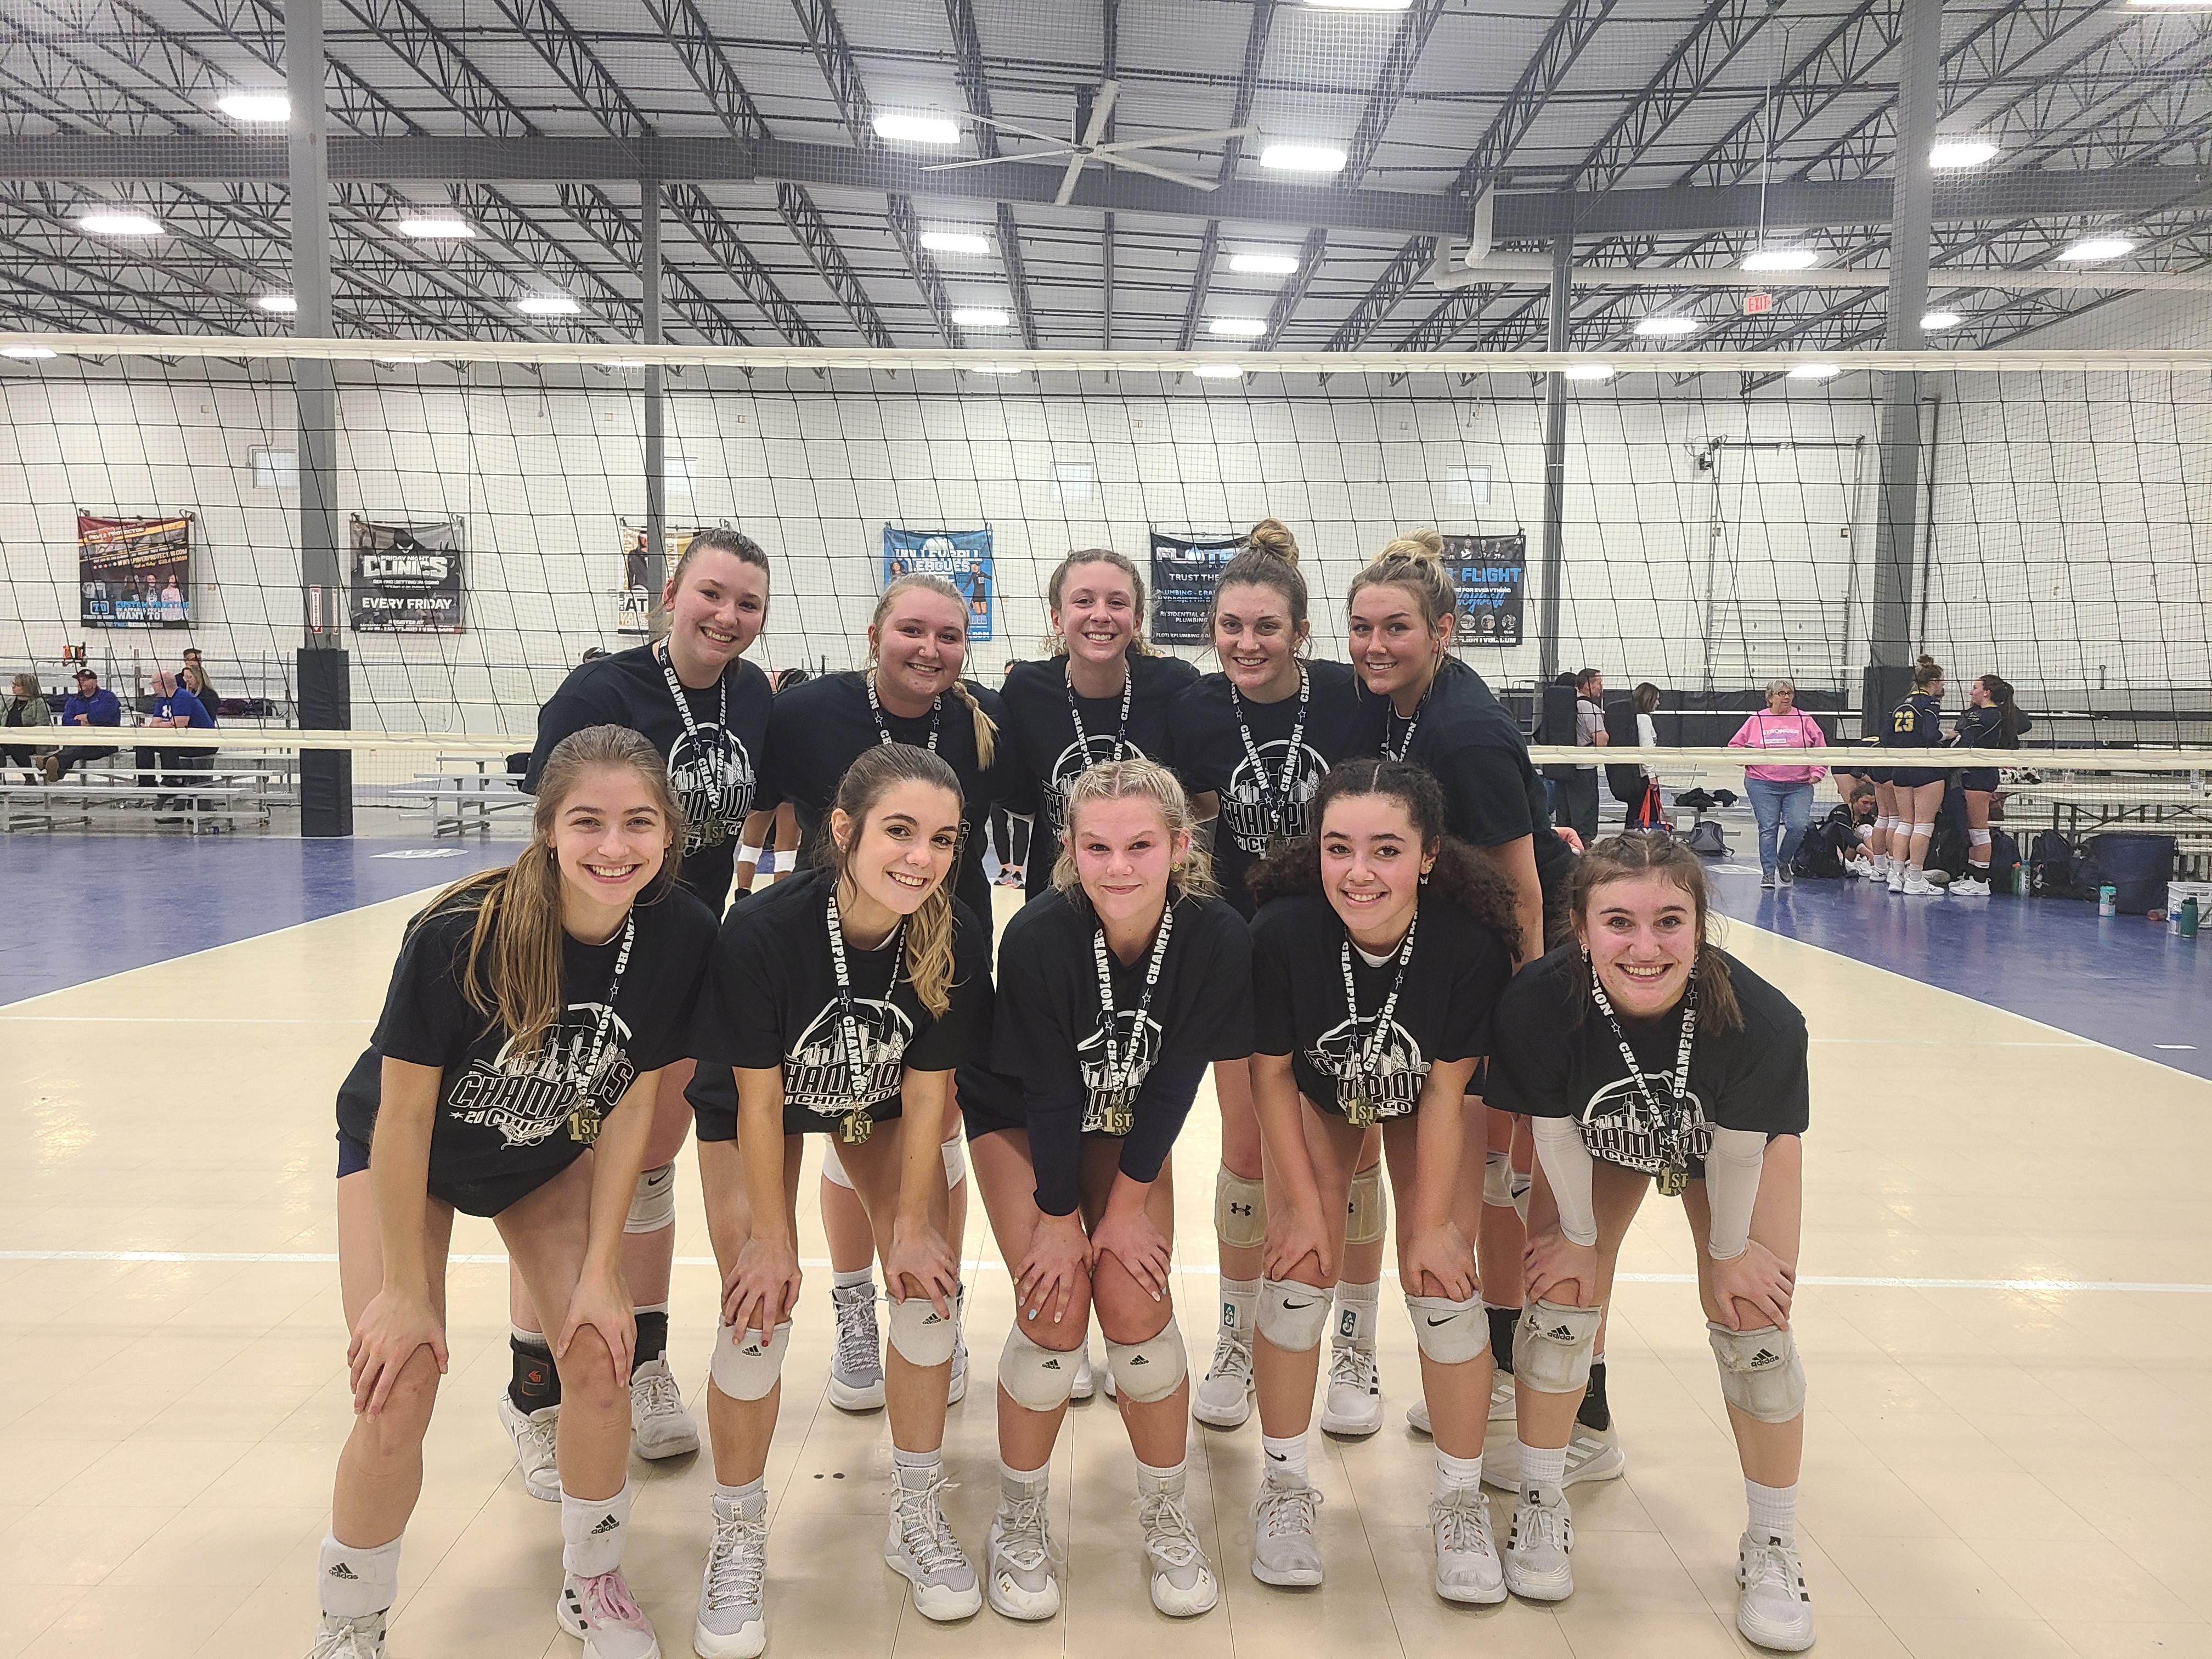 Experience top-notch volleyball training at Belusa United Volleyball Club. Our experienced coaches p Belusa United Volleyball Club Romeoville (815)955-8500